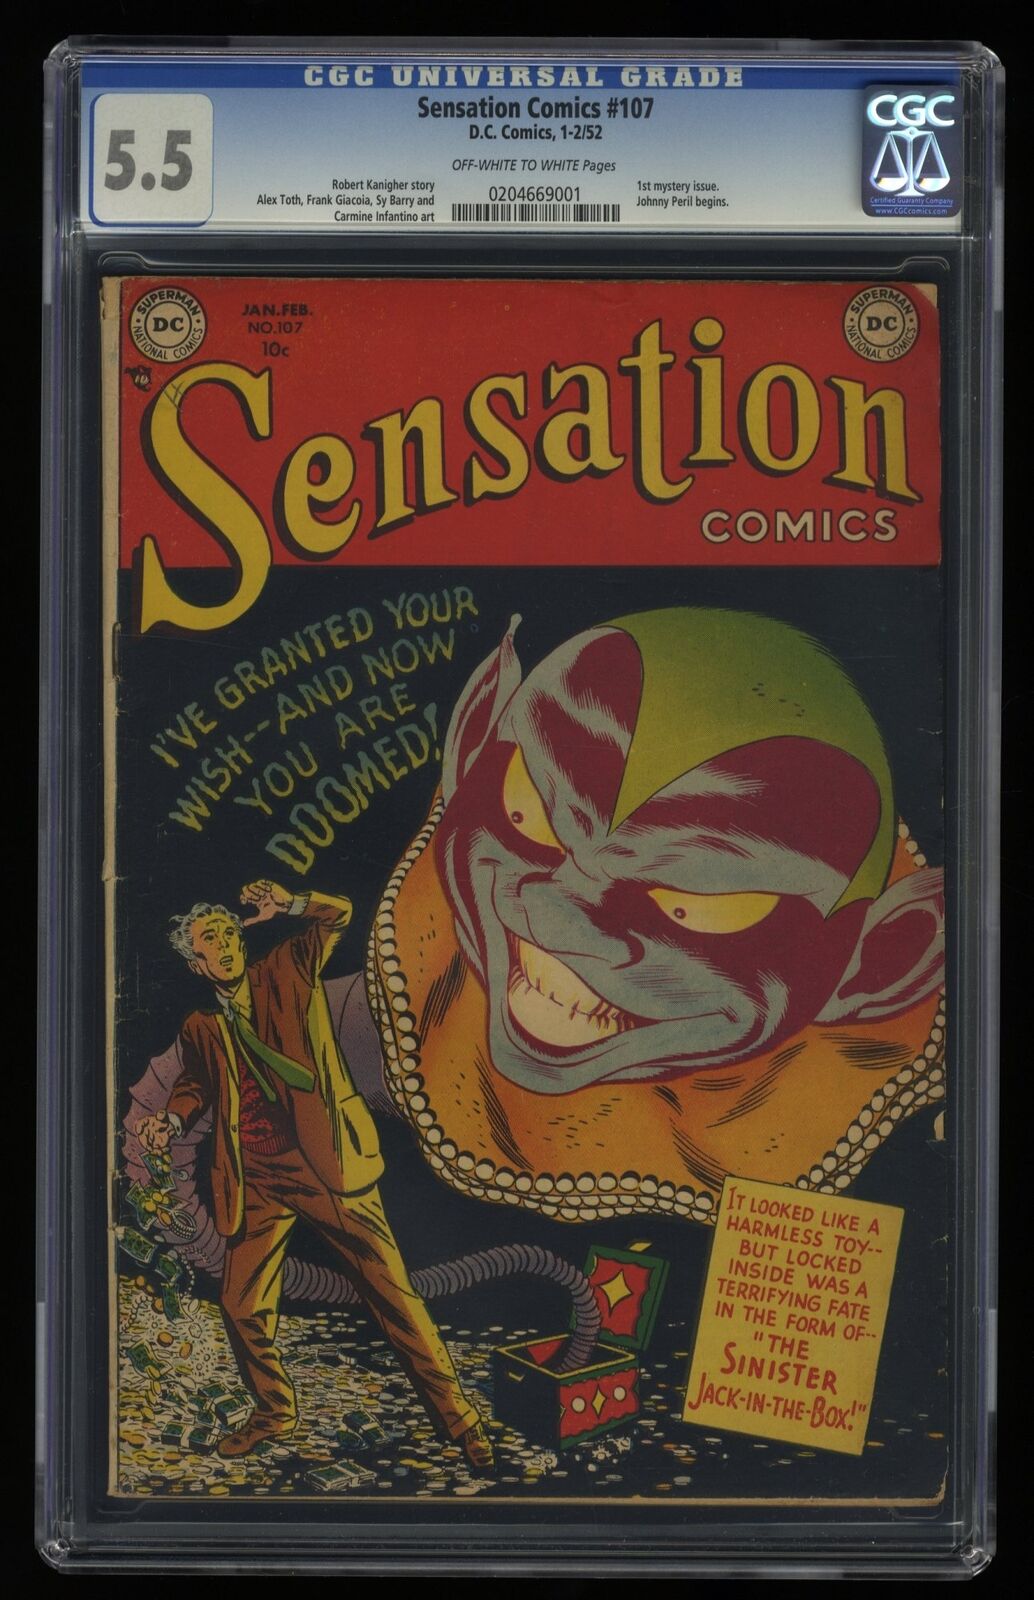 Sensation Comics #107 CGC FN- 5.5 Off White to White 1st Mystery Issue